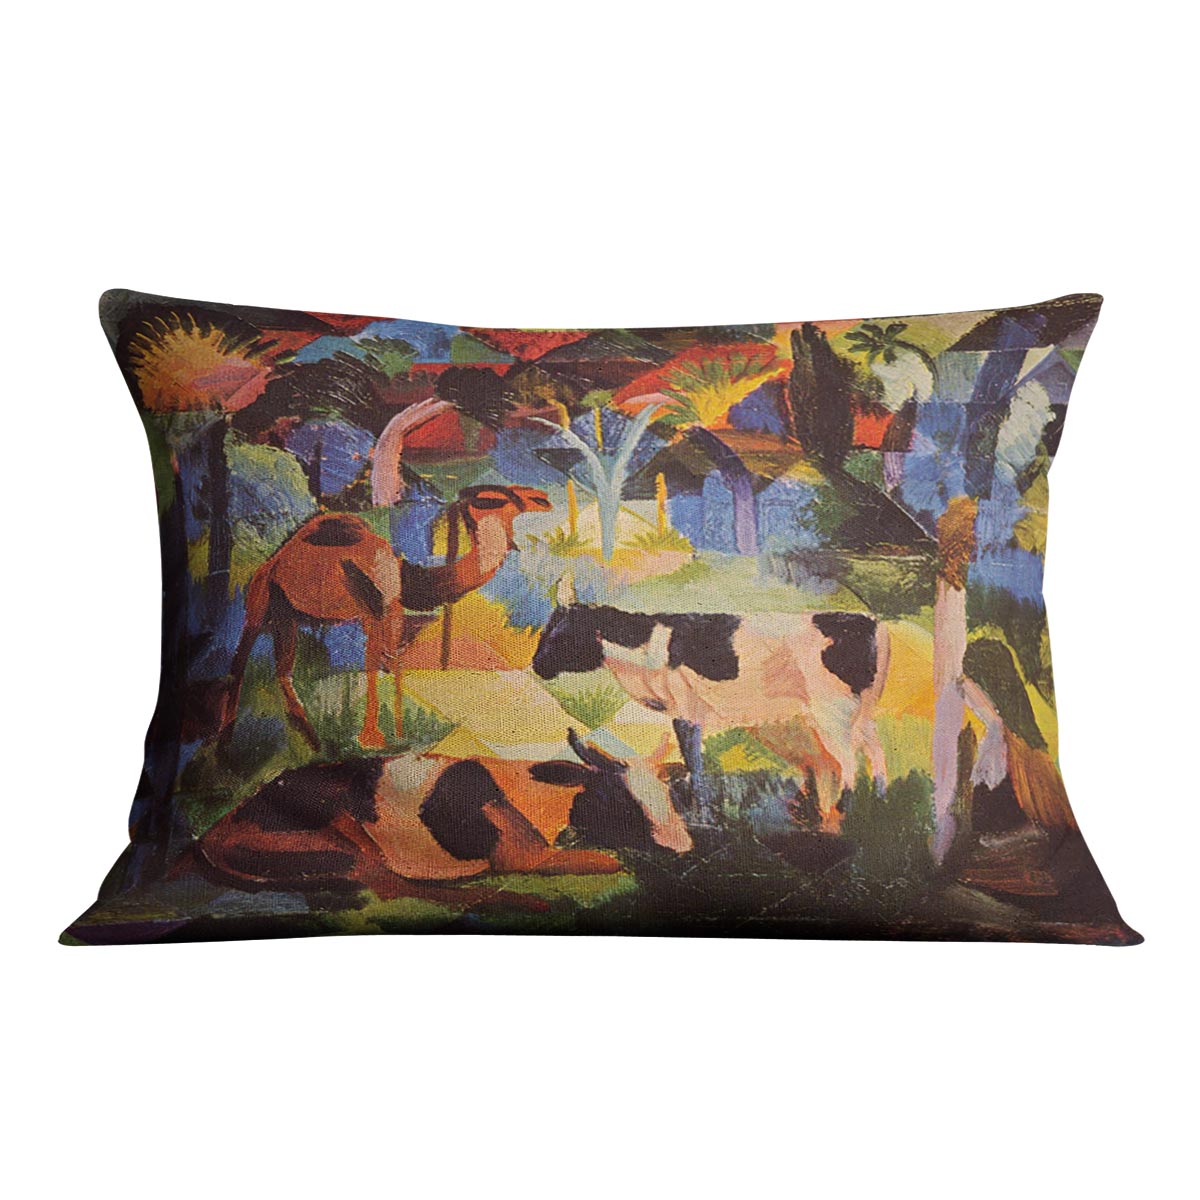 Landscape with cows and camels by Macke Cushion - Canvas Art Rocks - 4